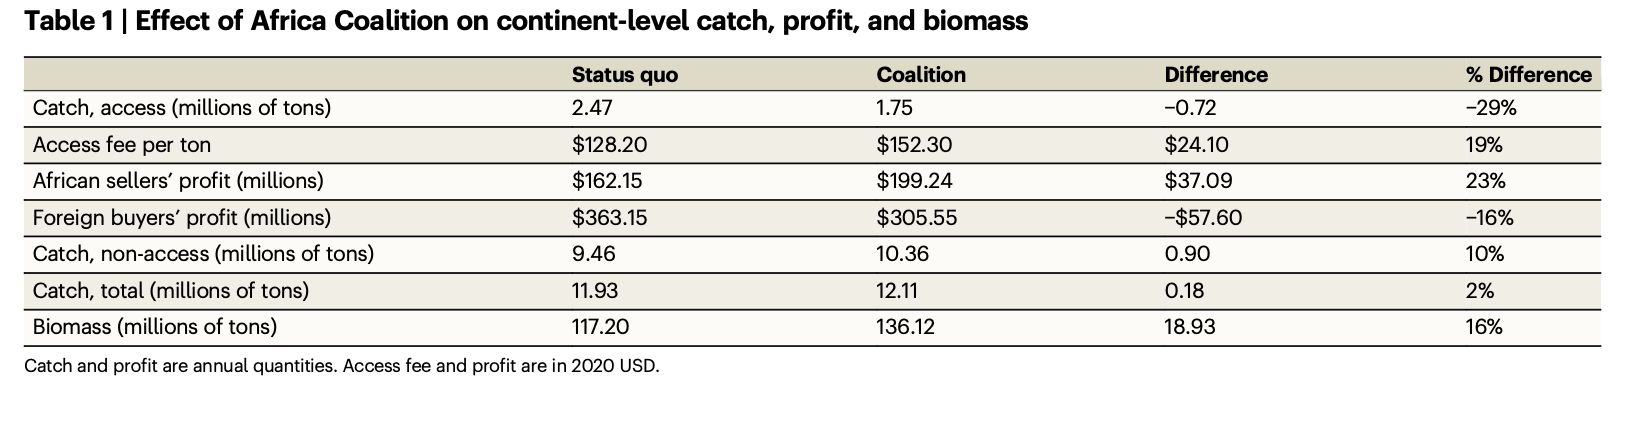 a table describing the effect of an Africa Coalition on catch, profit and biomass